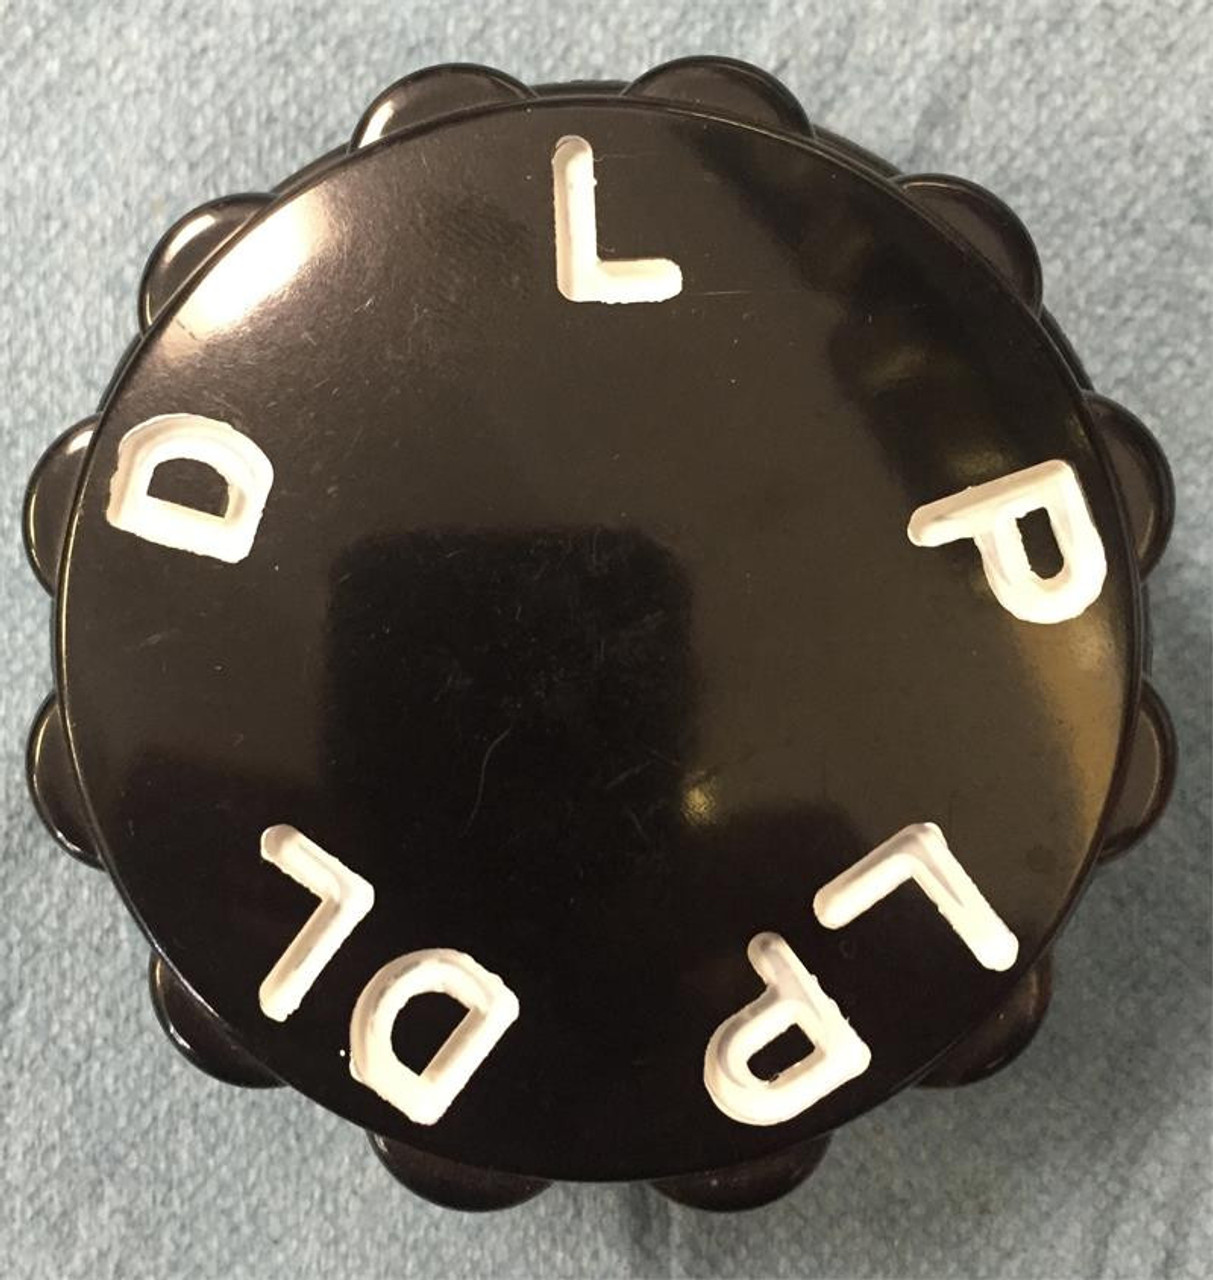 Looking for a Zenith 440 Dorsal and Lumbar Drop Selector Knob RIGHT SIDE, Zenith Dorsal Drop Selector Knob, Zenith Lumbar Drop Selector Knob, Zenith Drop Selector Knob, Zenith Selector Knob, Zenith Drop Knob, Zenith Table Knob, Zenith Knob?